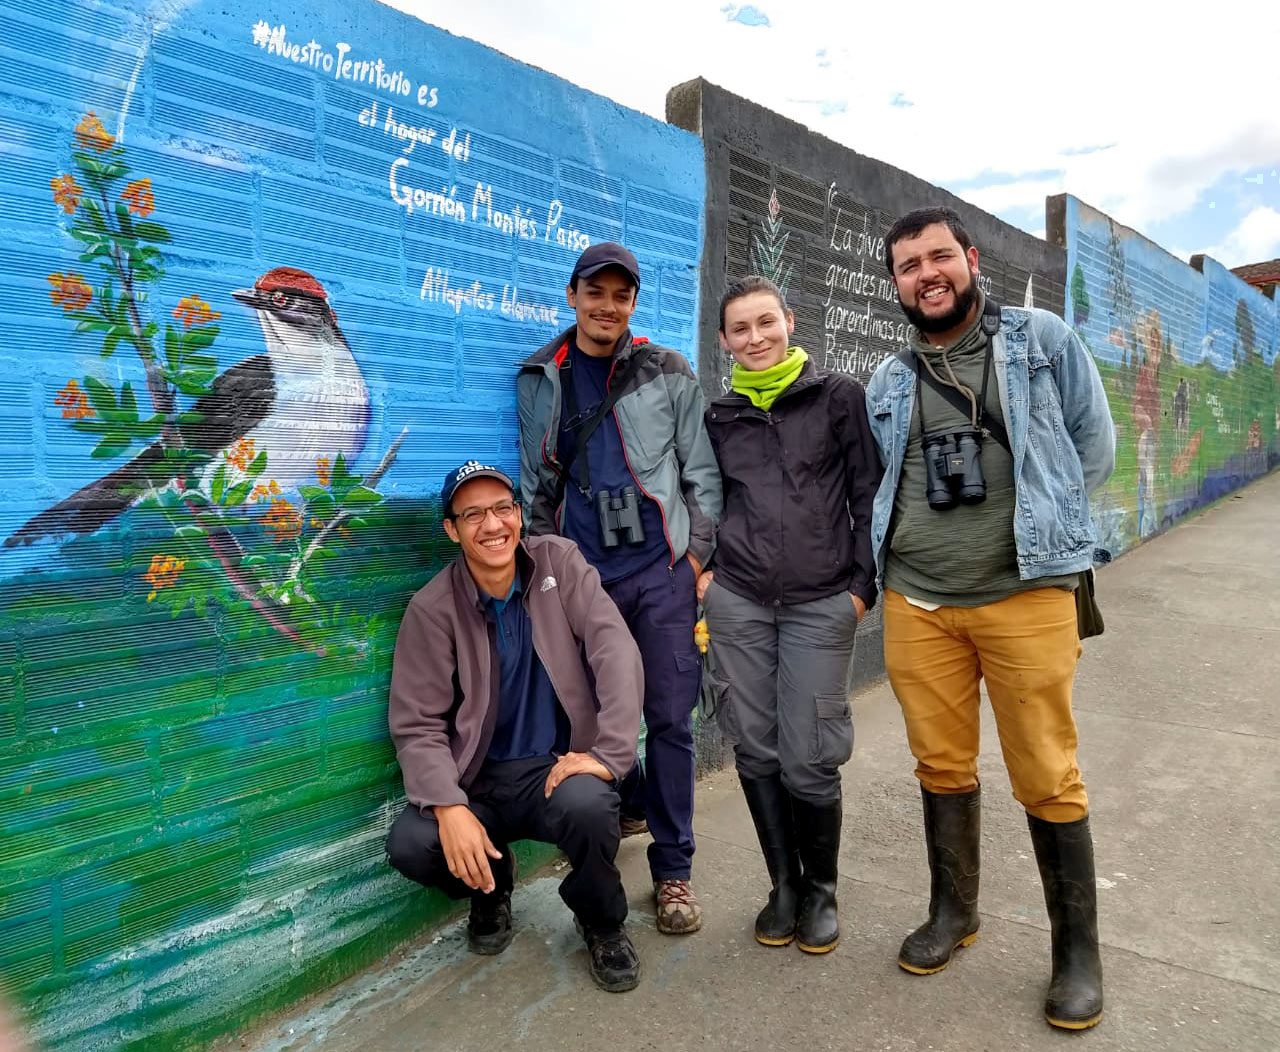 The Antioquia Brushfinch was officially rediscovered for science by the teamwork of (left to right) biology professor Juan L. Parra, ornithologist Sergio Chaparro-Herrera, biologist Andrea Lopera-Salazar, and birder Rodolfo Correa Peña. Photo by Andrea Lopera-Salazar.